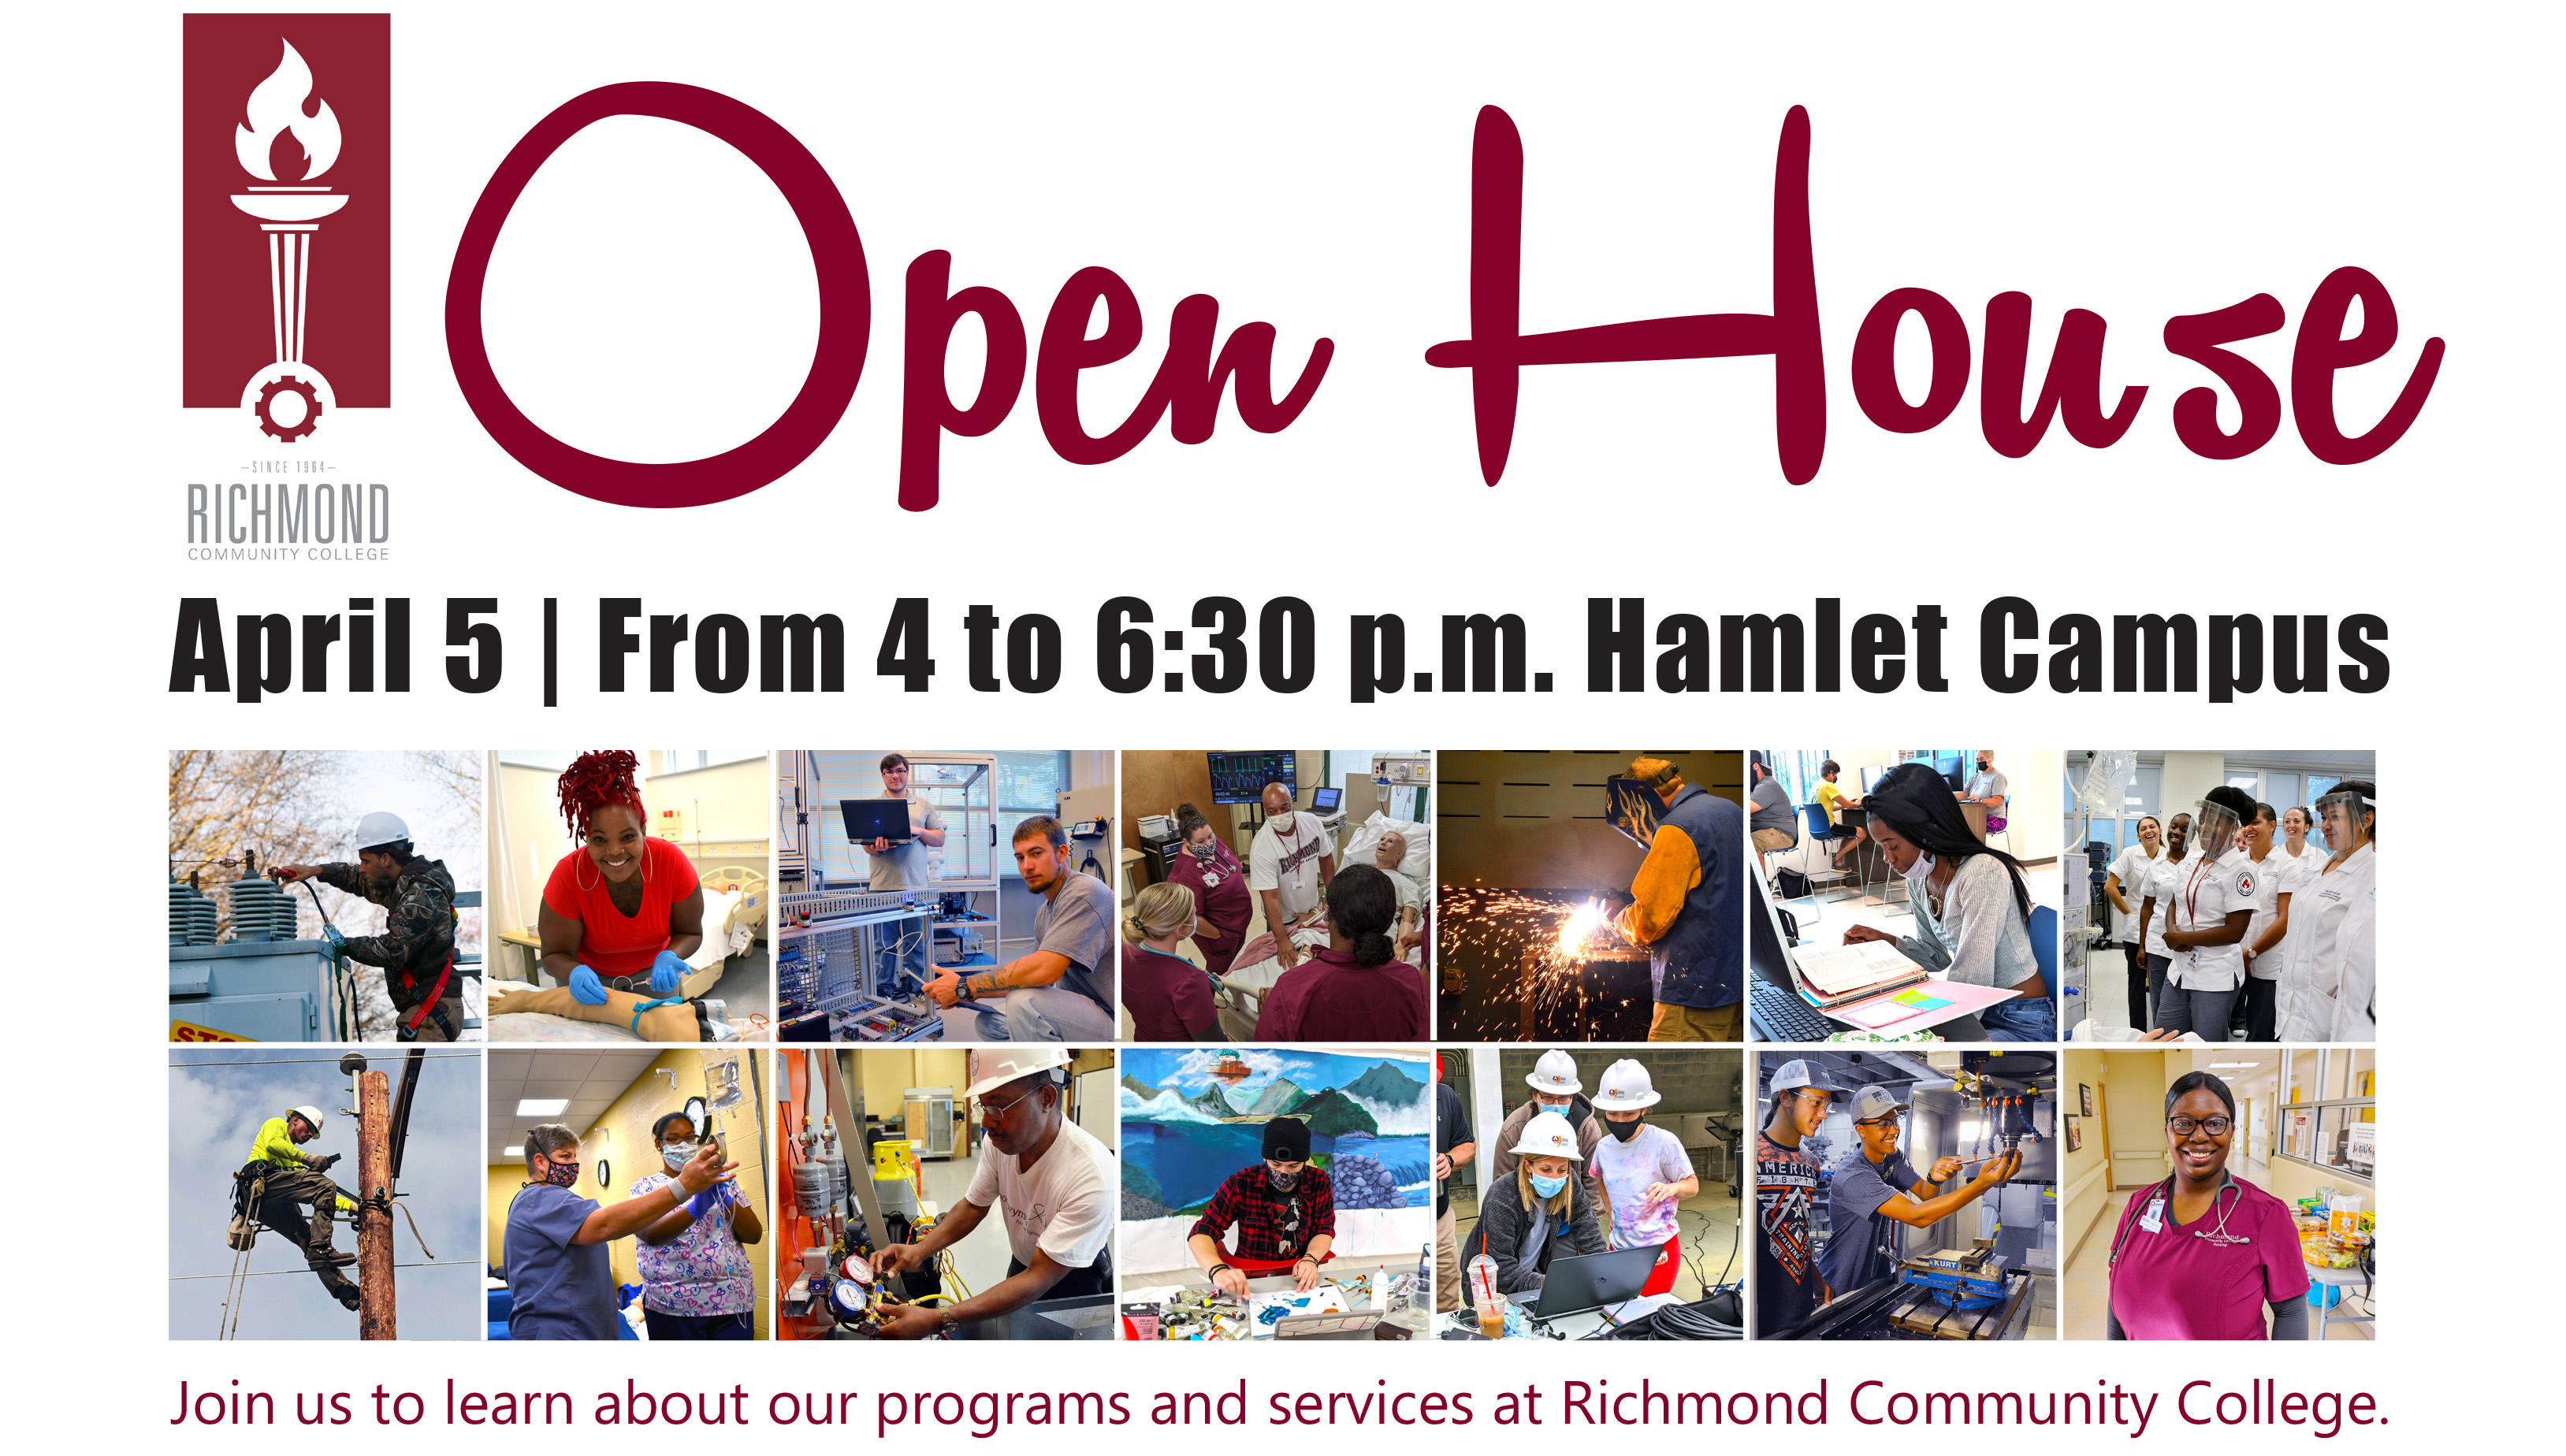 Open House is April 5 from 4 to 6:30 p.m. at the Hamlet Campus